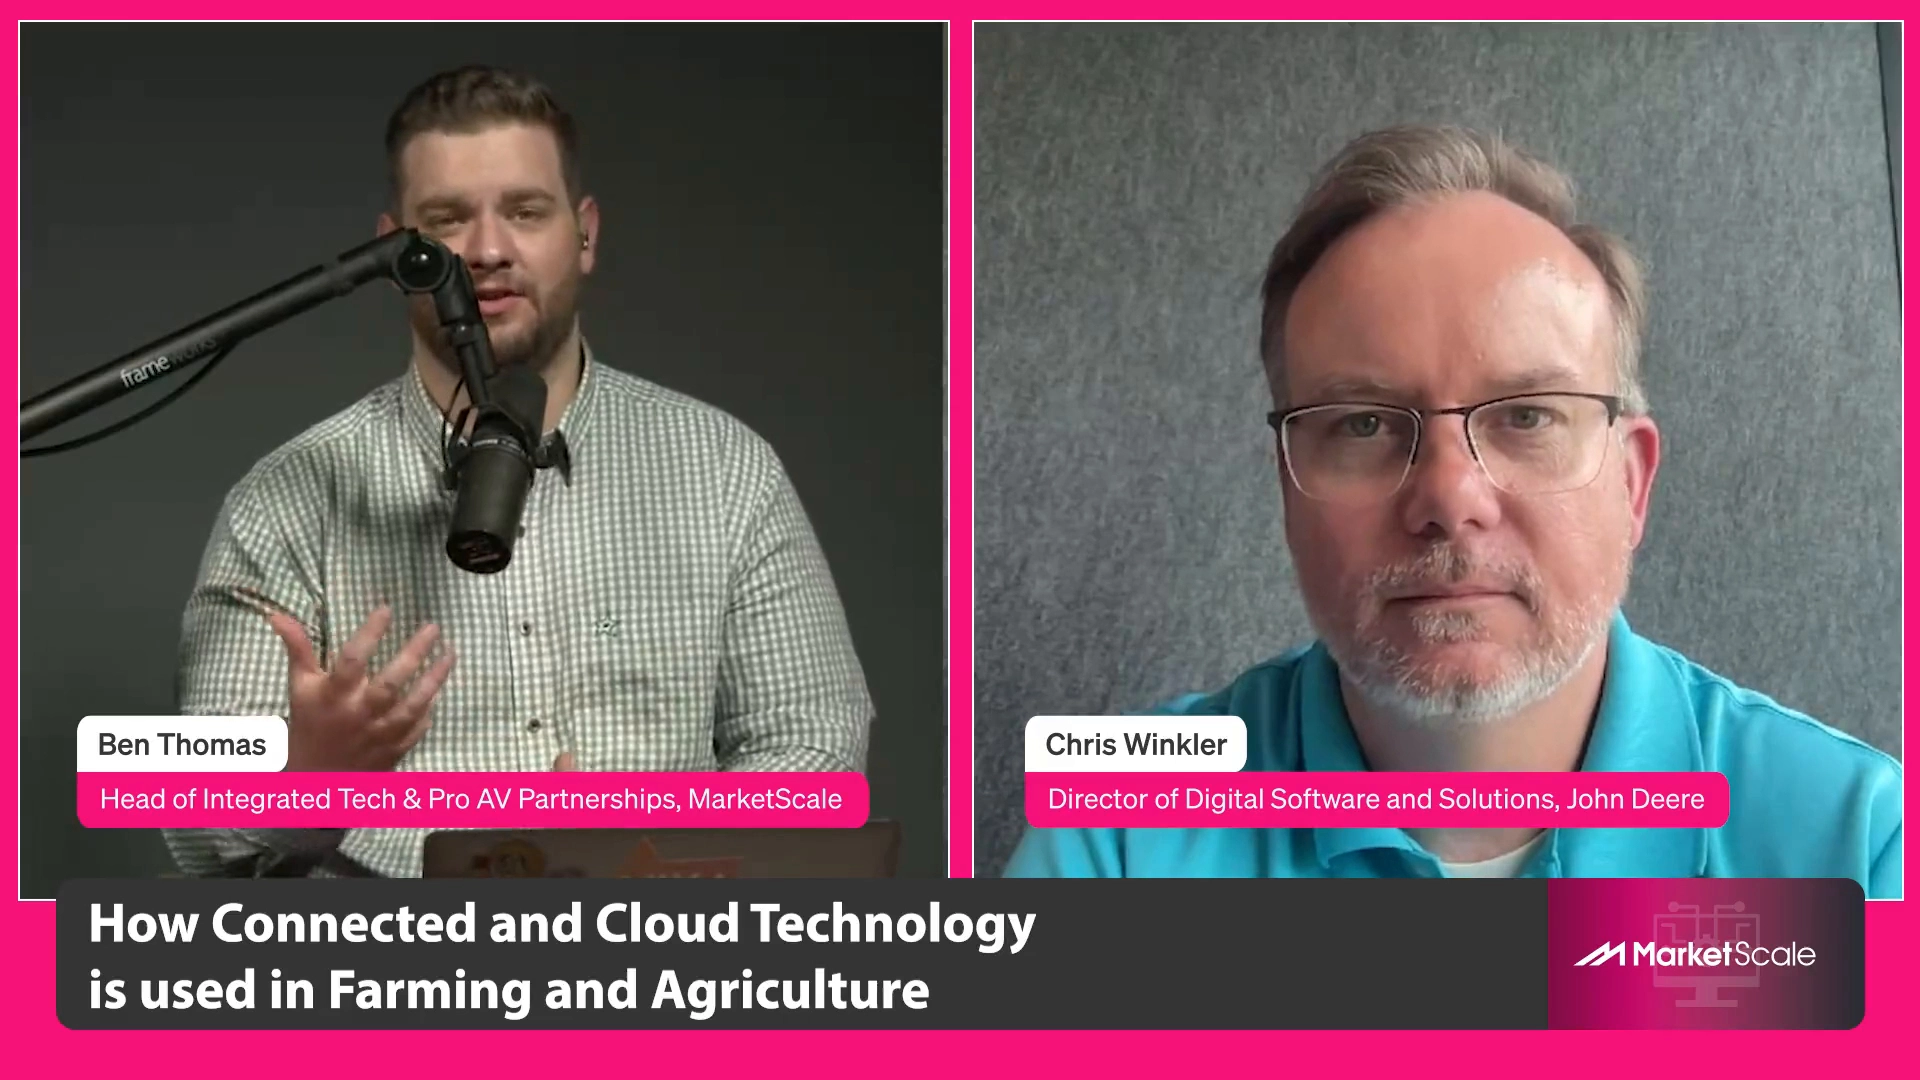 Leveraging Connected and Cloud Technologies to Revolutionize Farming and Agriculture Operations